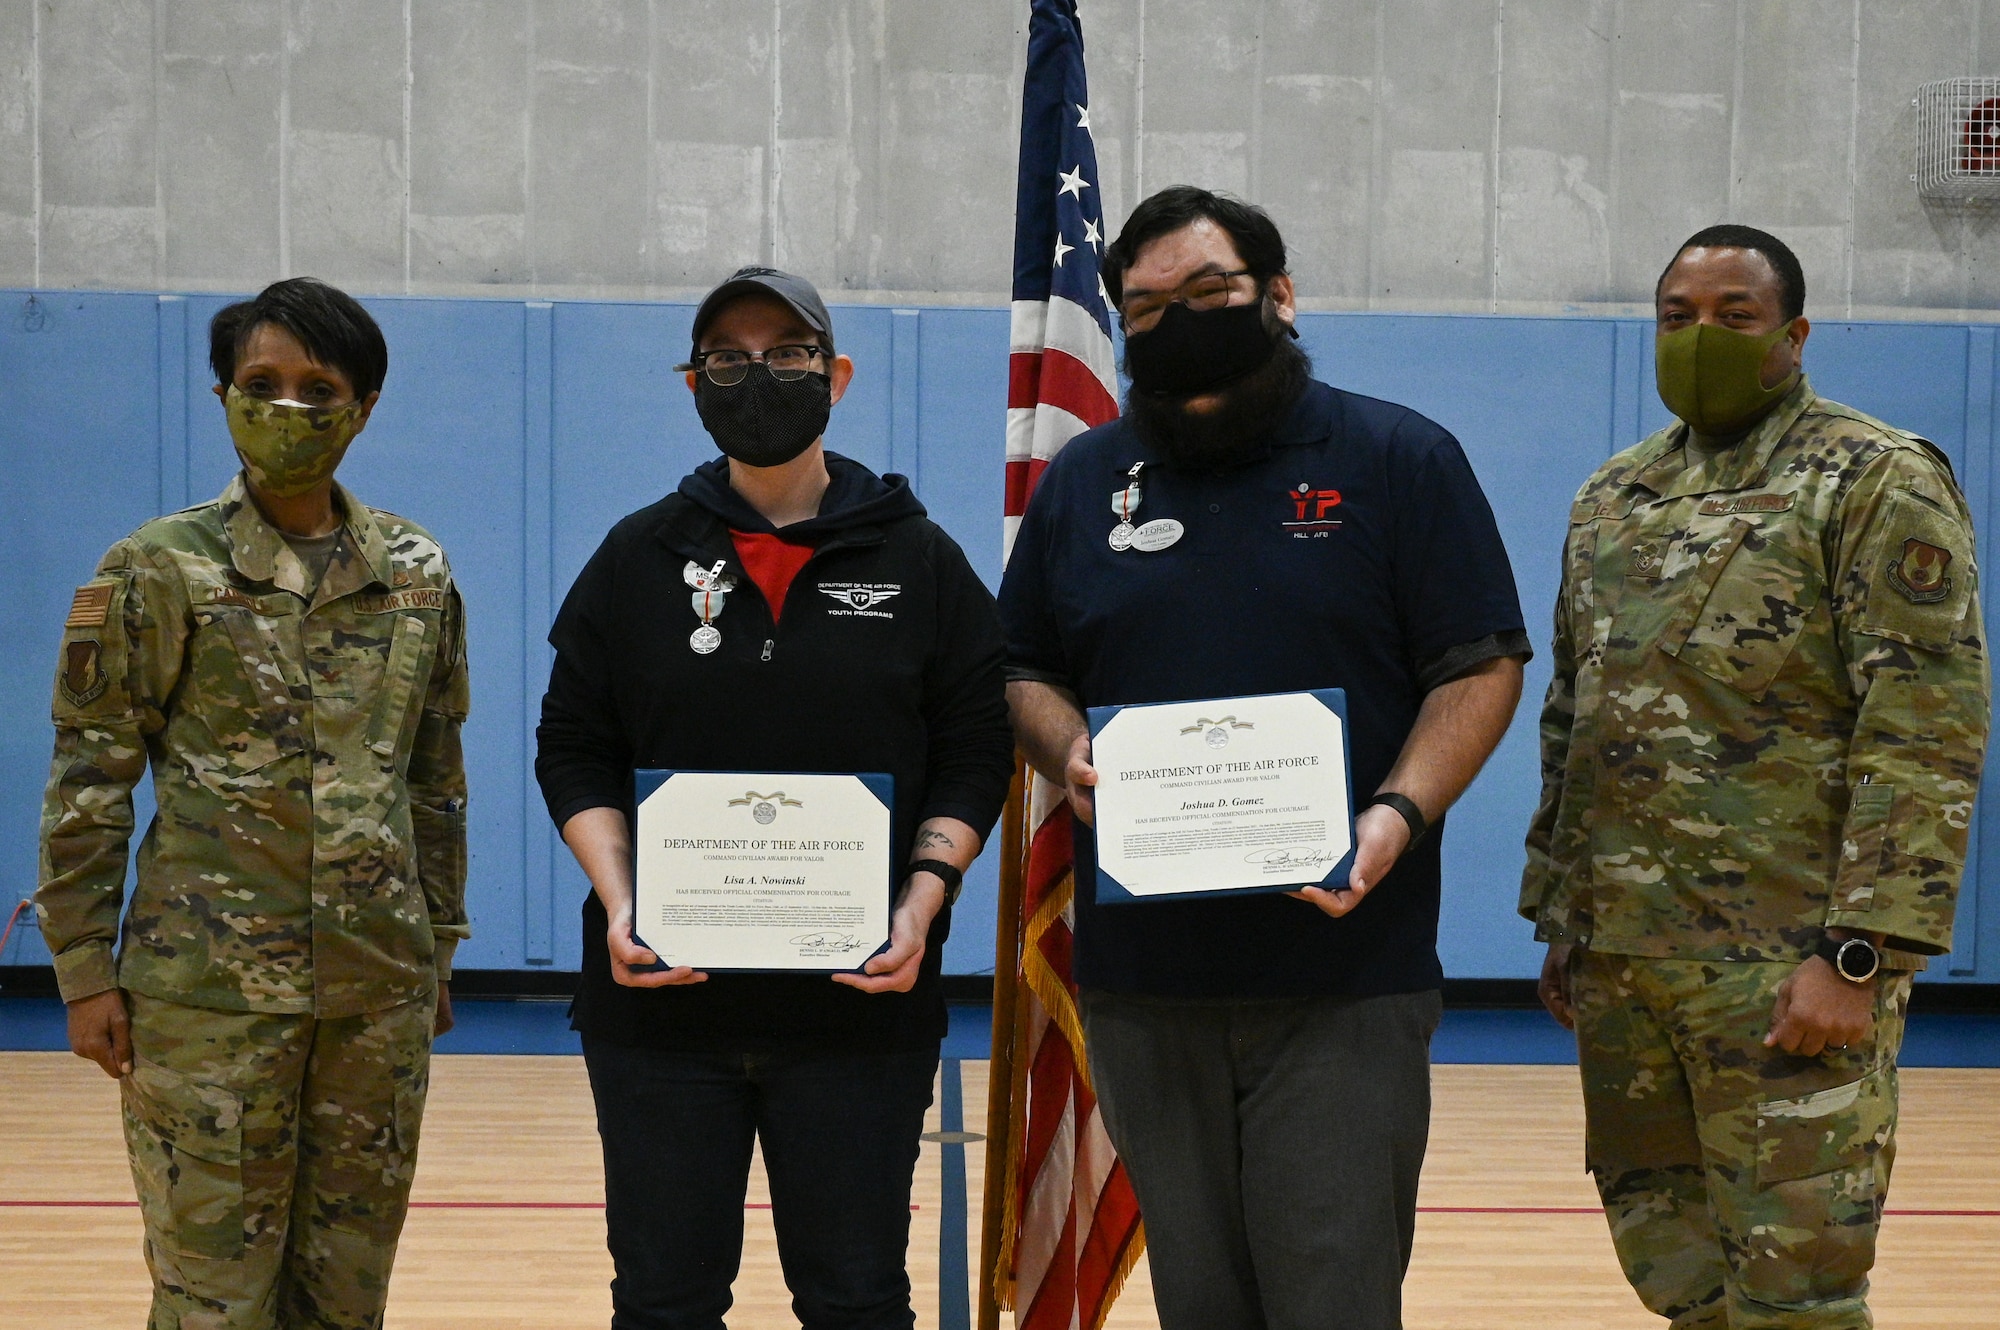 From left: Col. Jenise Carroll, 75th Air Base Wing commander, Nowinksi, Gomez, and Chief Master Sgt. Raymond Riley, 75th ABW command chief posing for a photo. Nowinski and Gomez are holding their certificates and have the Award for Valor medals pinned to their chests.